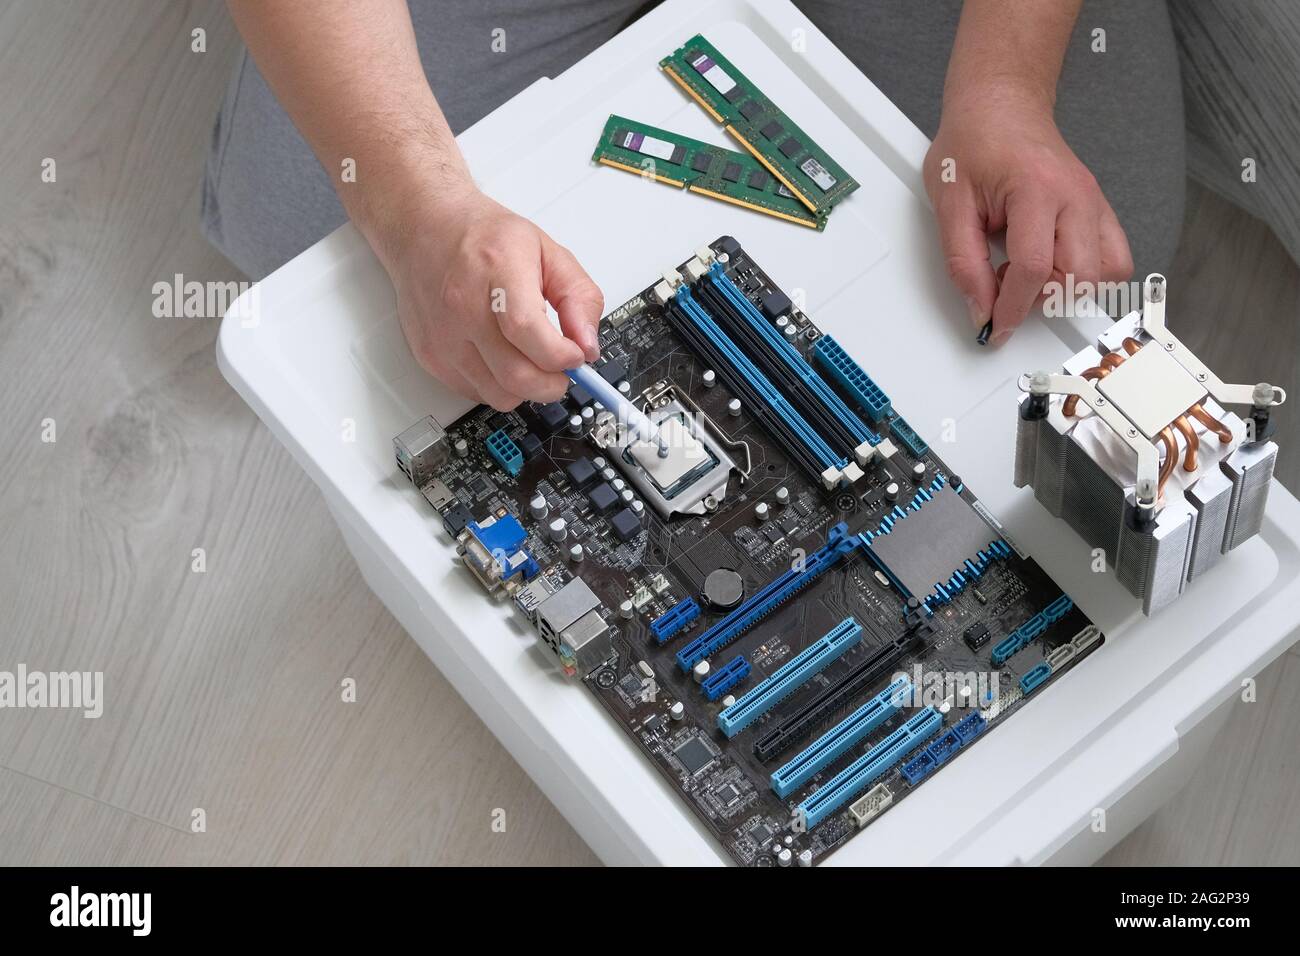 Thermal grease for computer. Male hand applied thermal paste to processor. Service electronics and computers concept. Stock Photo